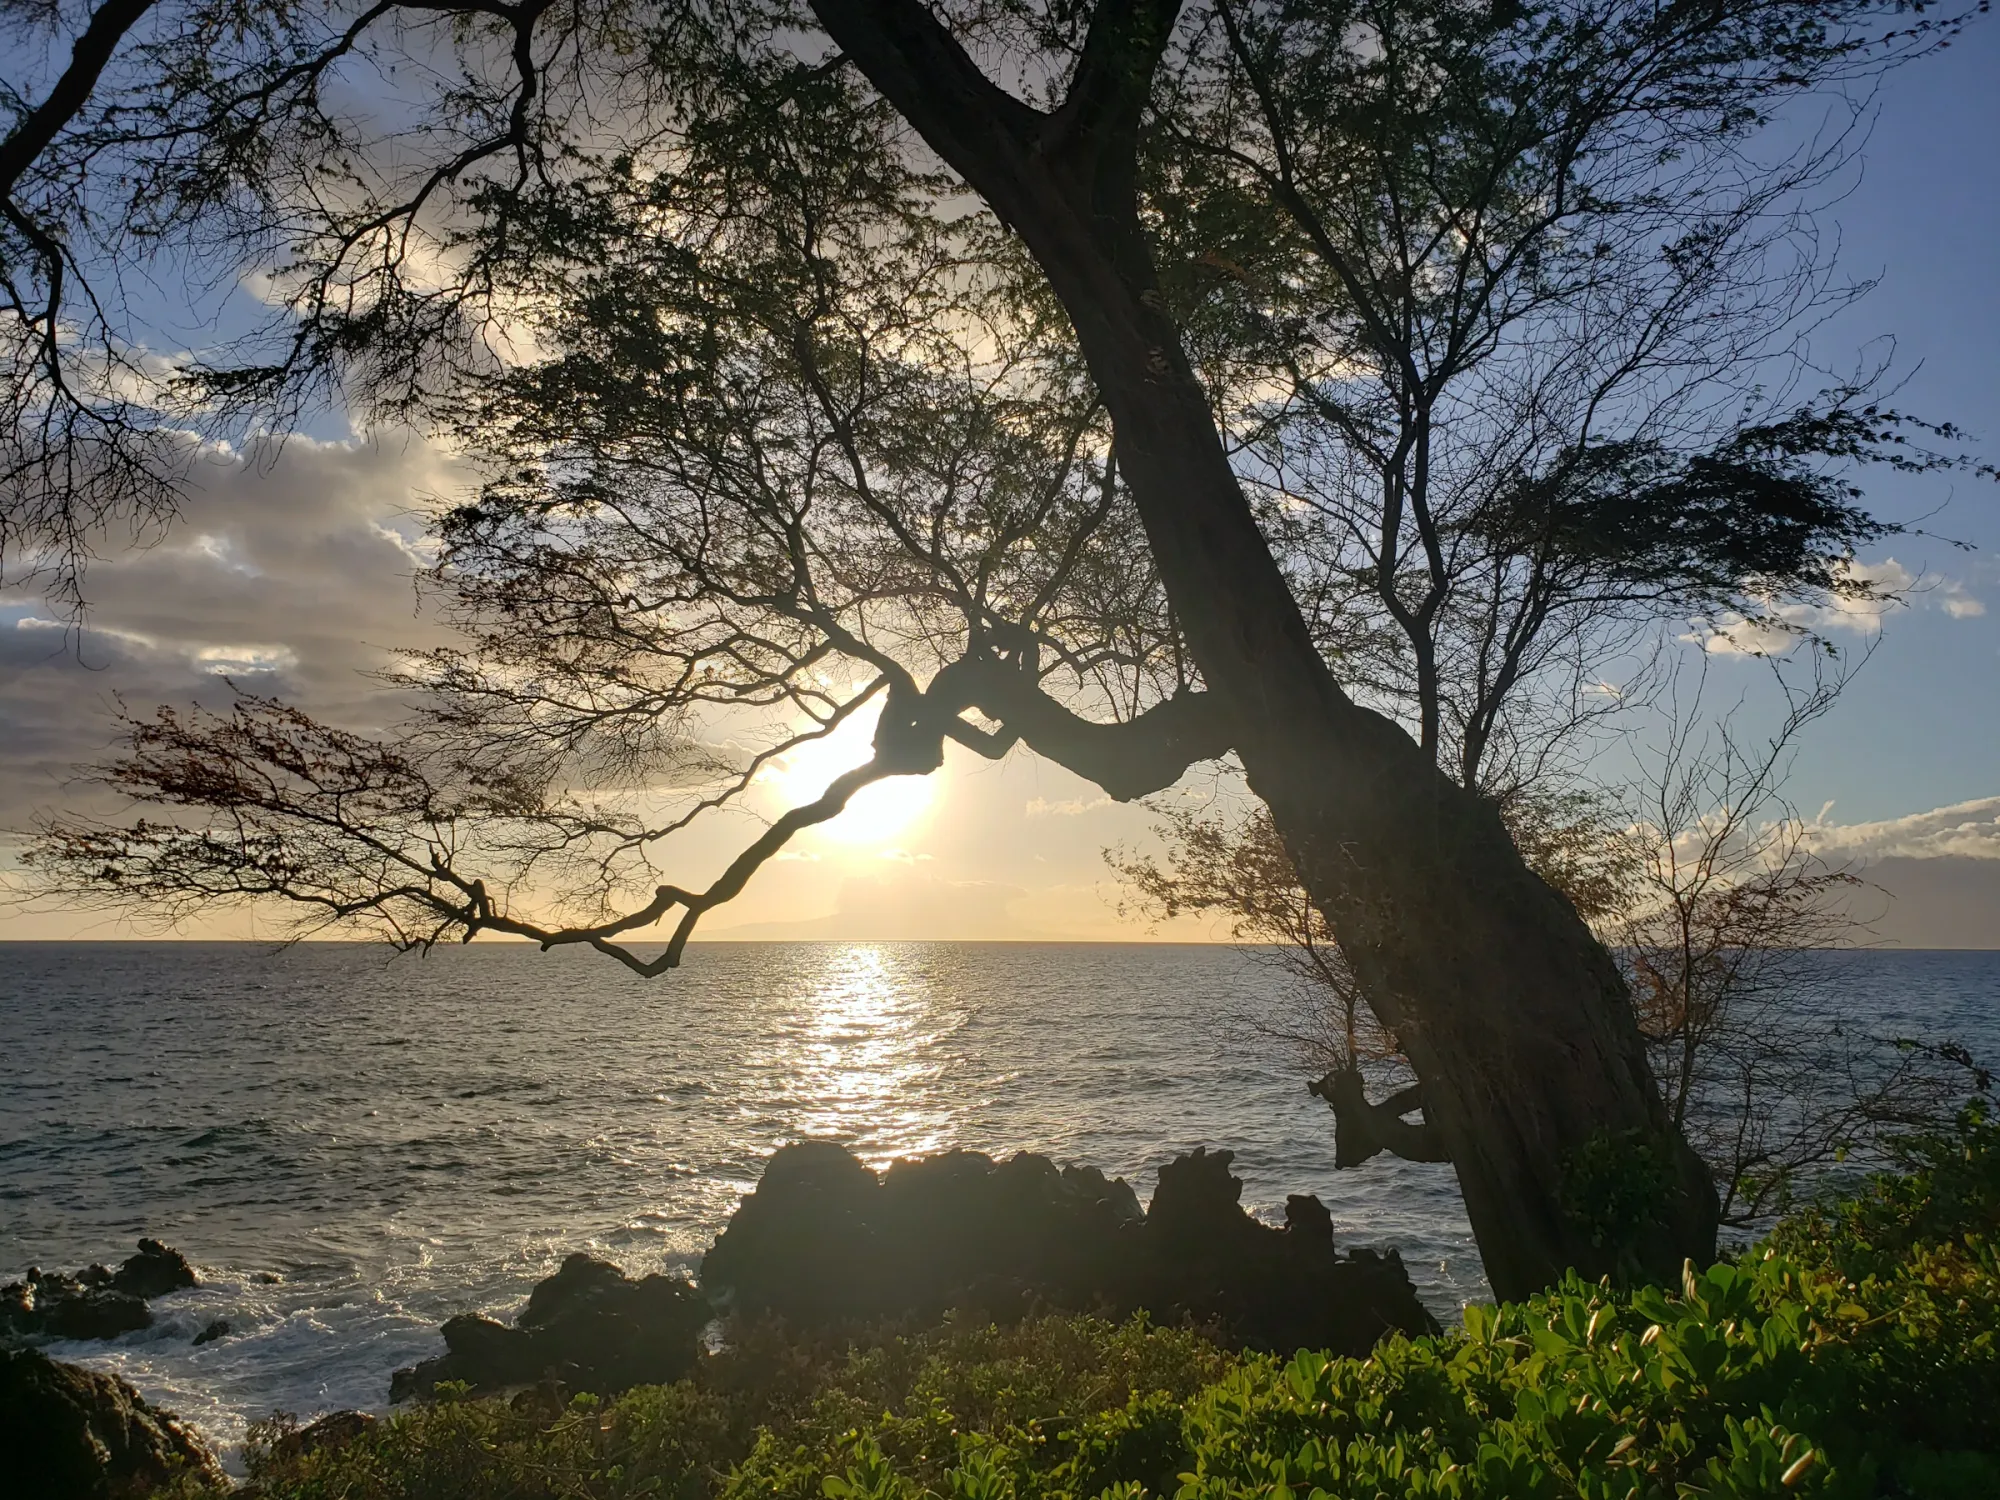 Maui, travel guide part two